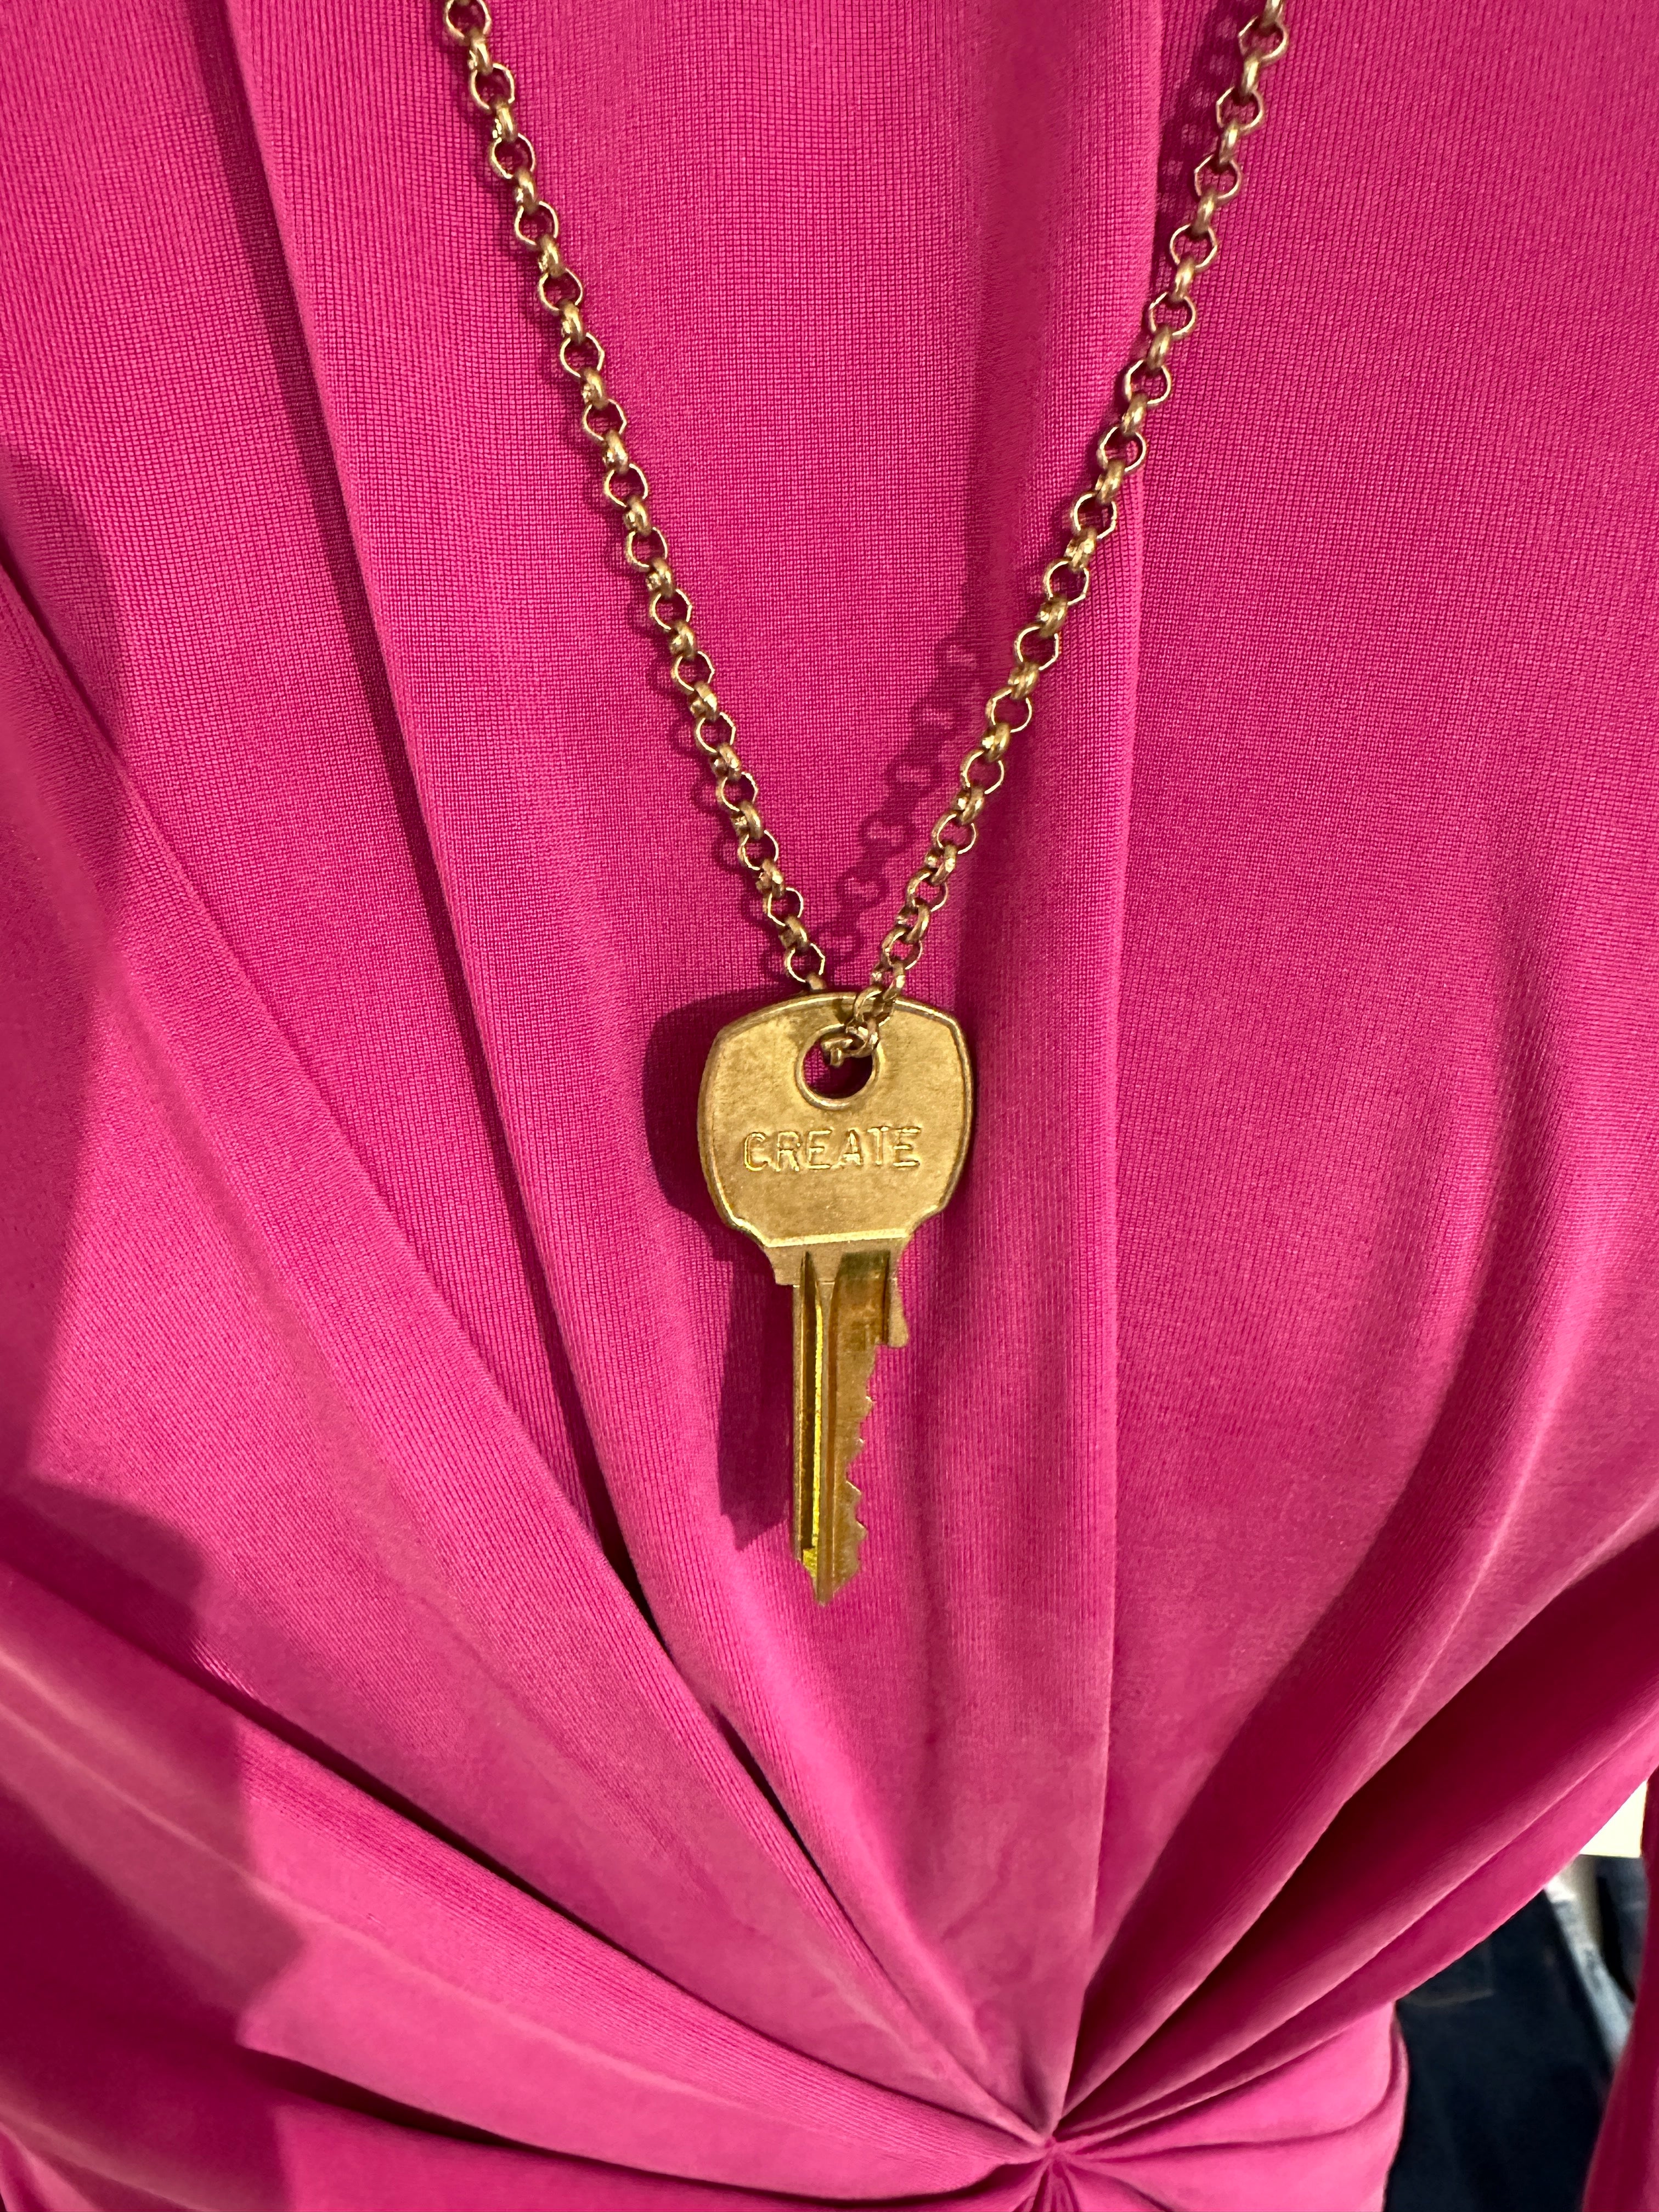 The Giving Key Necklace in Create